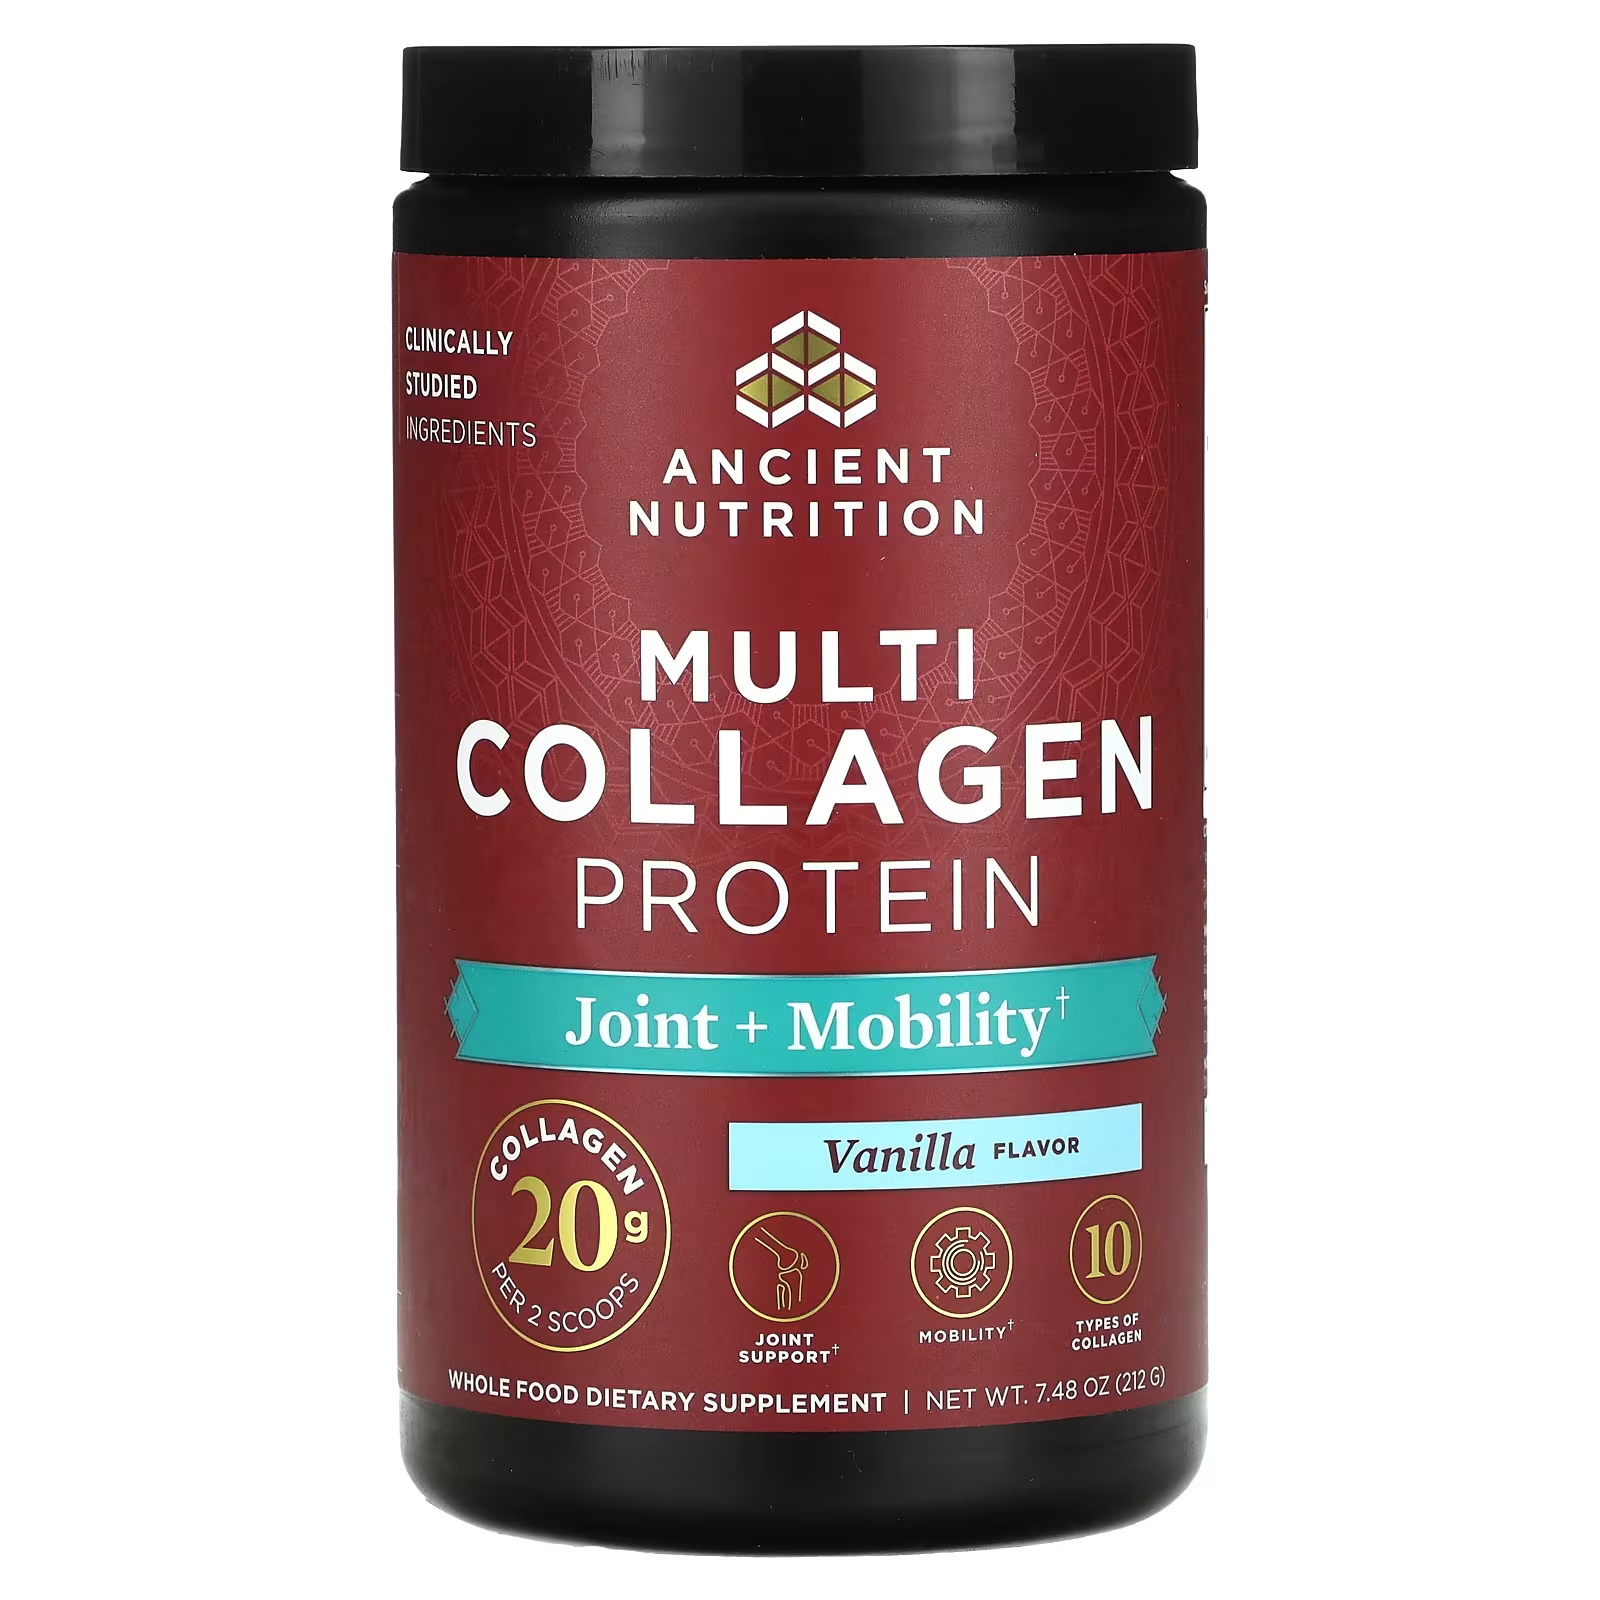 Пищевая добавка Ancient Nutrition Multi Collagen Protein Joint + Mobility Vanilla, 212 г